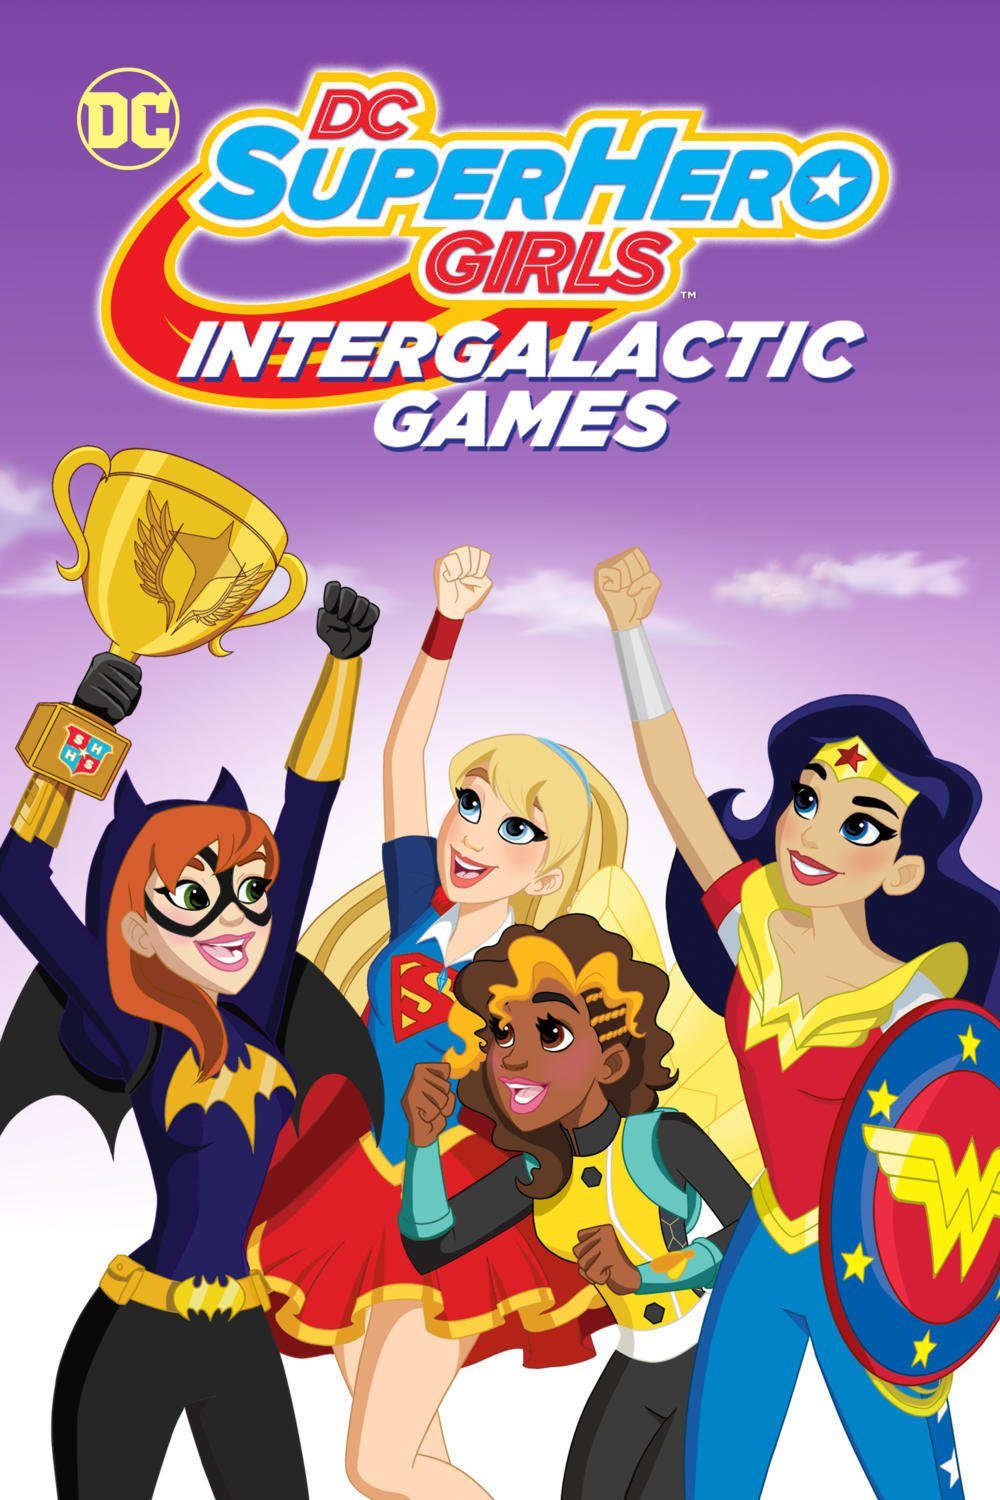 Poster of the movie DC Super Hero Girls: Intergalactic Games